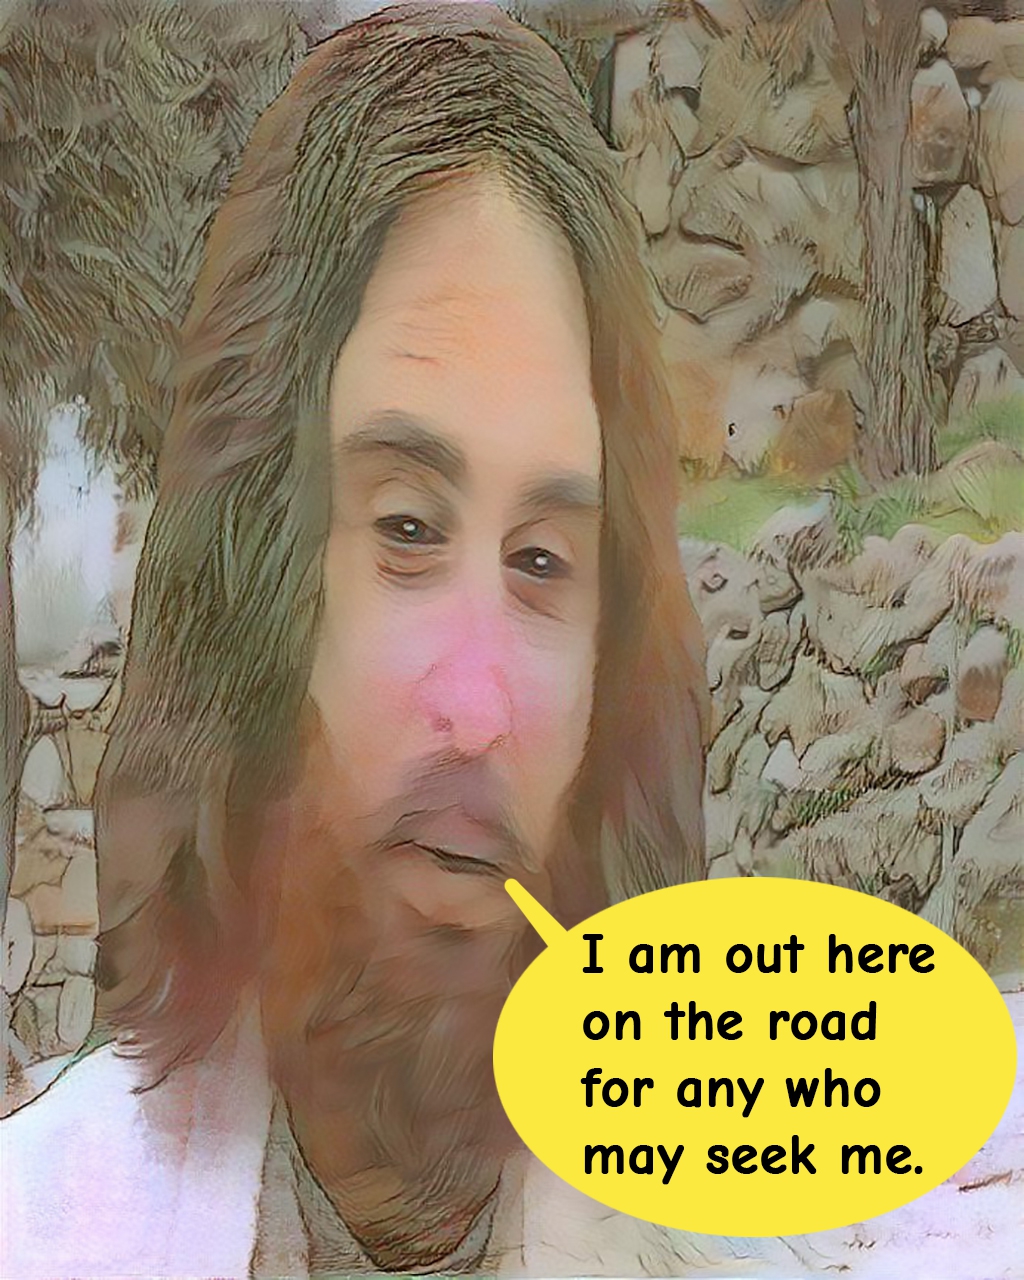 Jesus saying "I am out here on the road for any who may seek me."